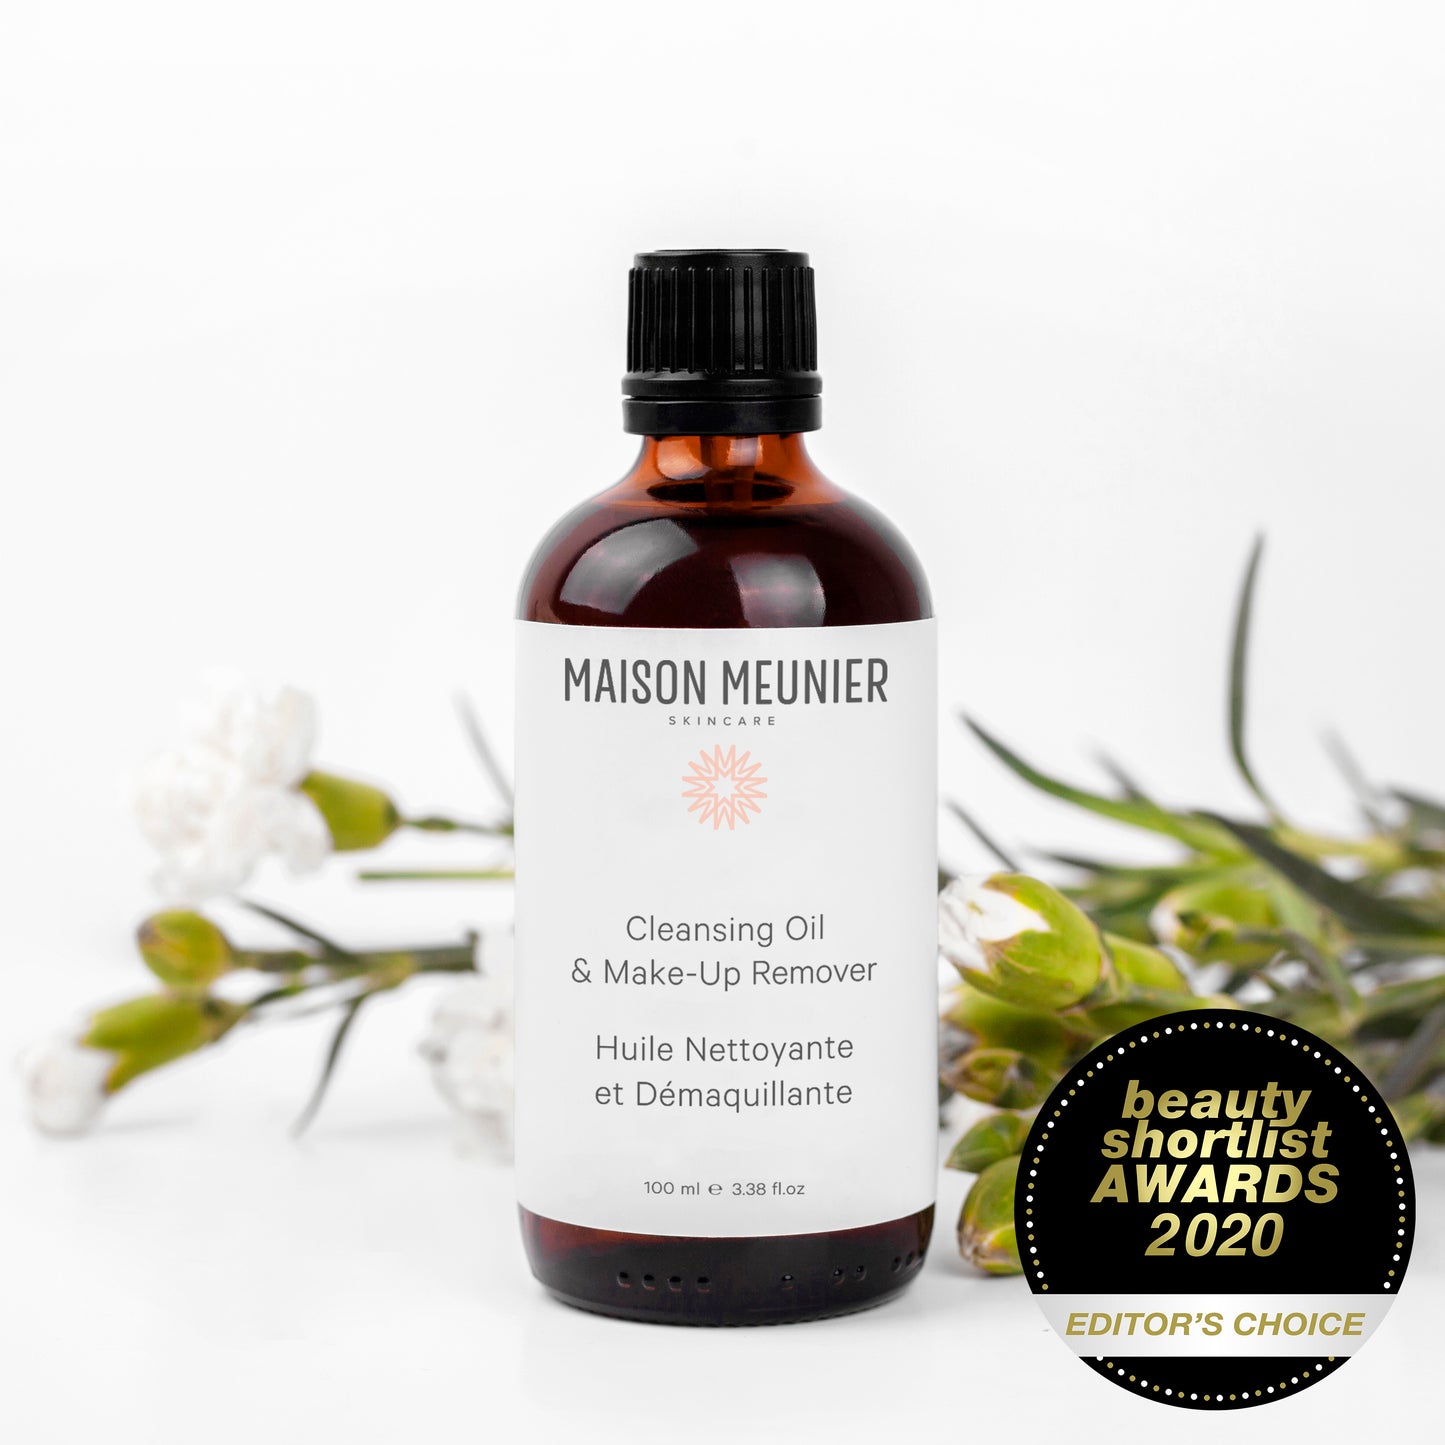 CLEANSING OIL AND MAKE-UP REMOVER